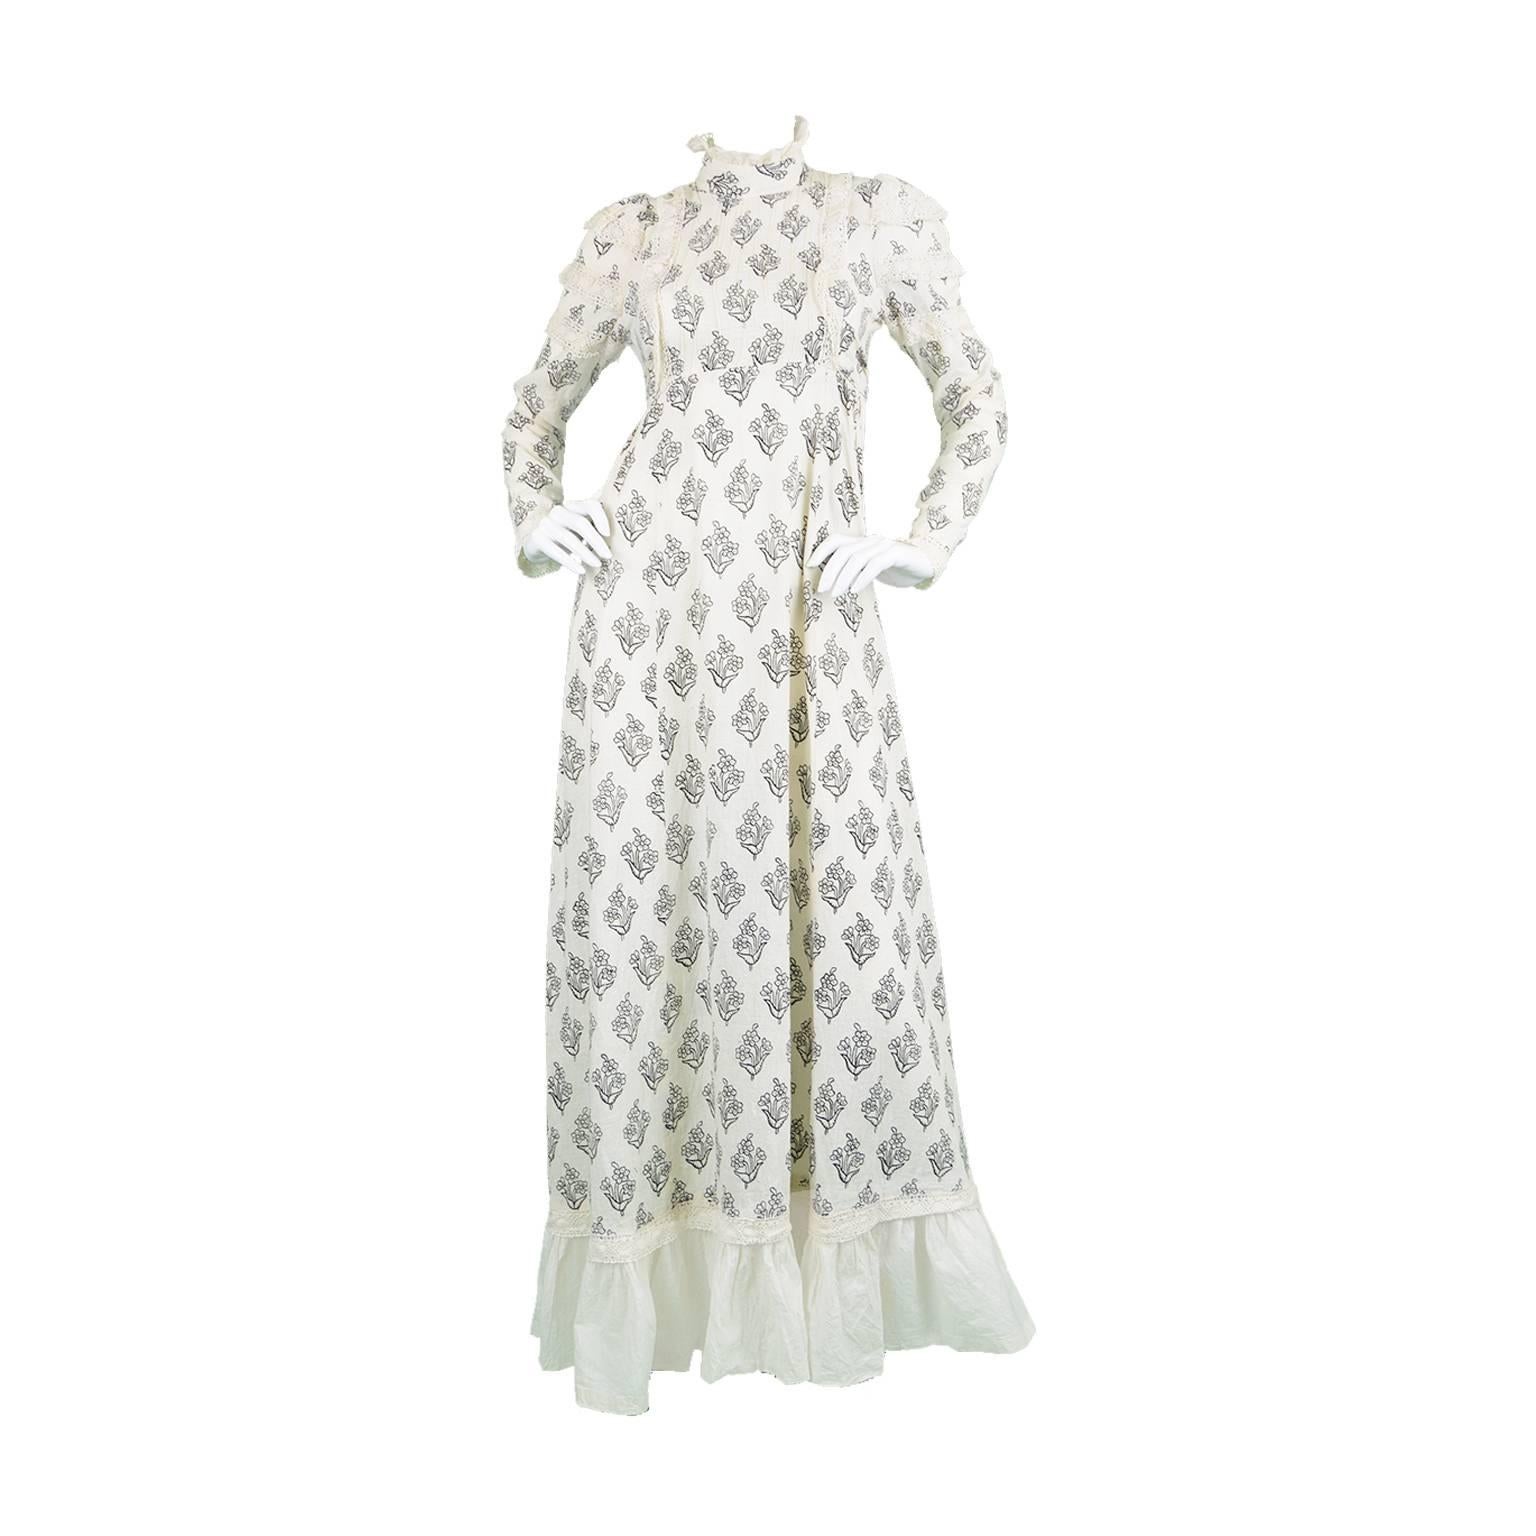 London Mob of Carnaby Street 1970s Vintage Cotton Maxi Dress For Sale